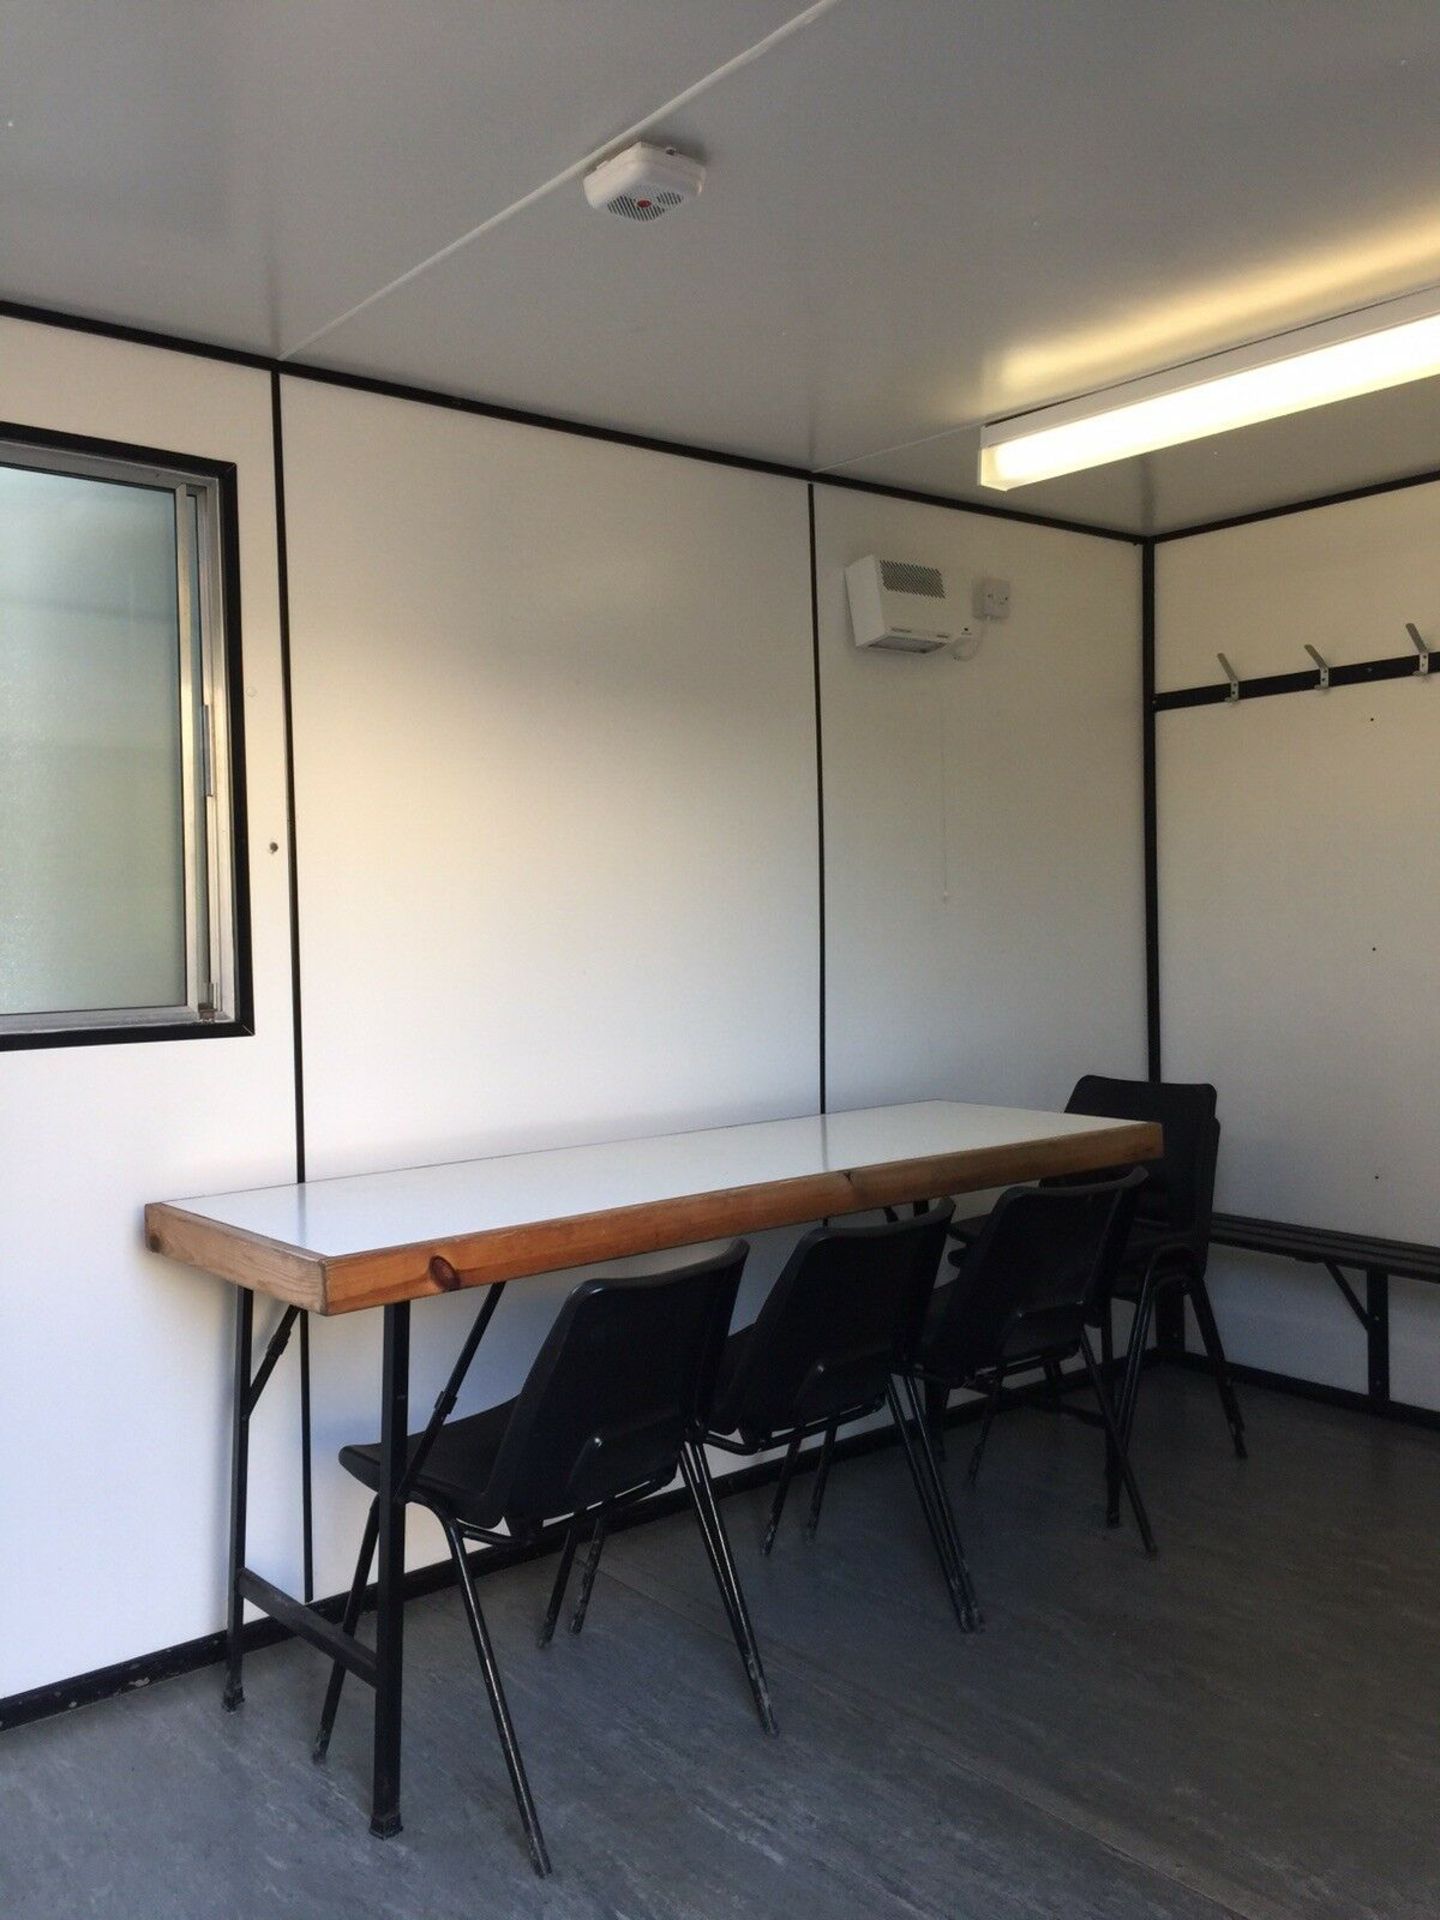 Site Welfare Unit Office Cabin Drying Room Canteen - Image 6 of 9